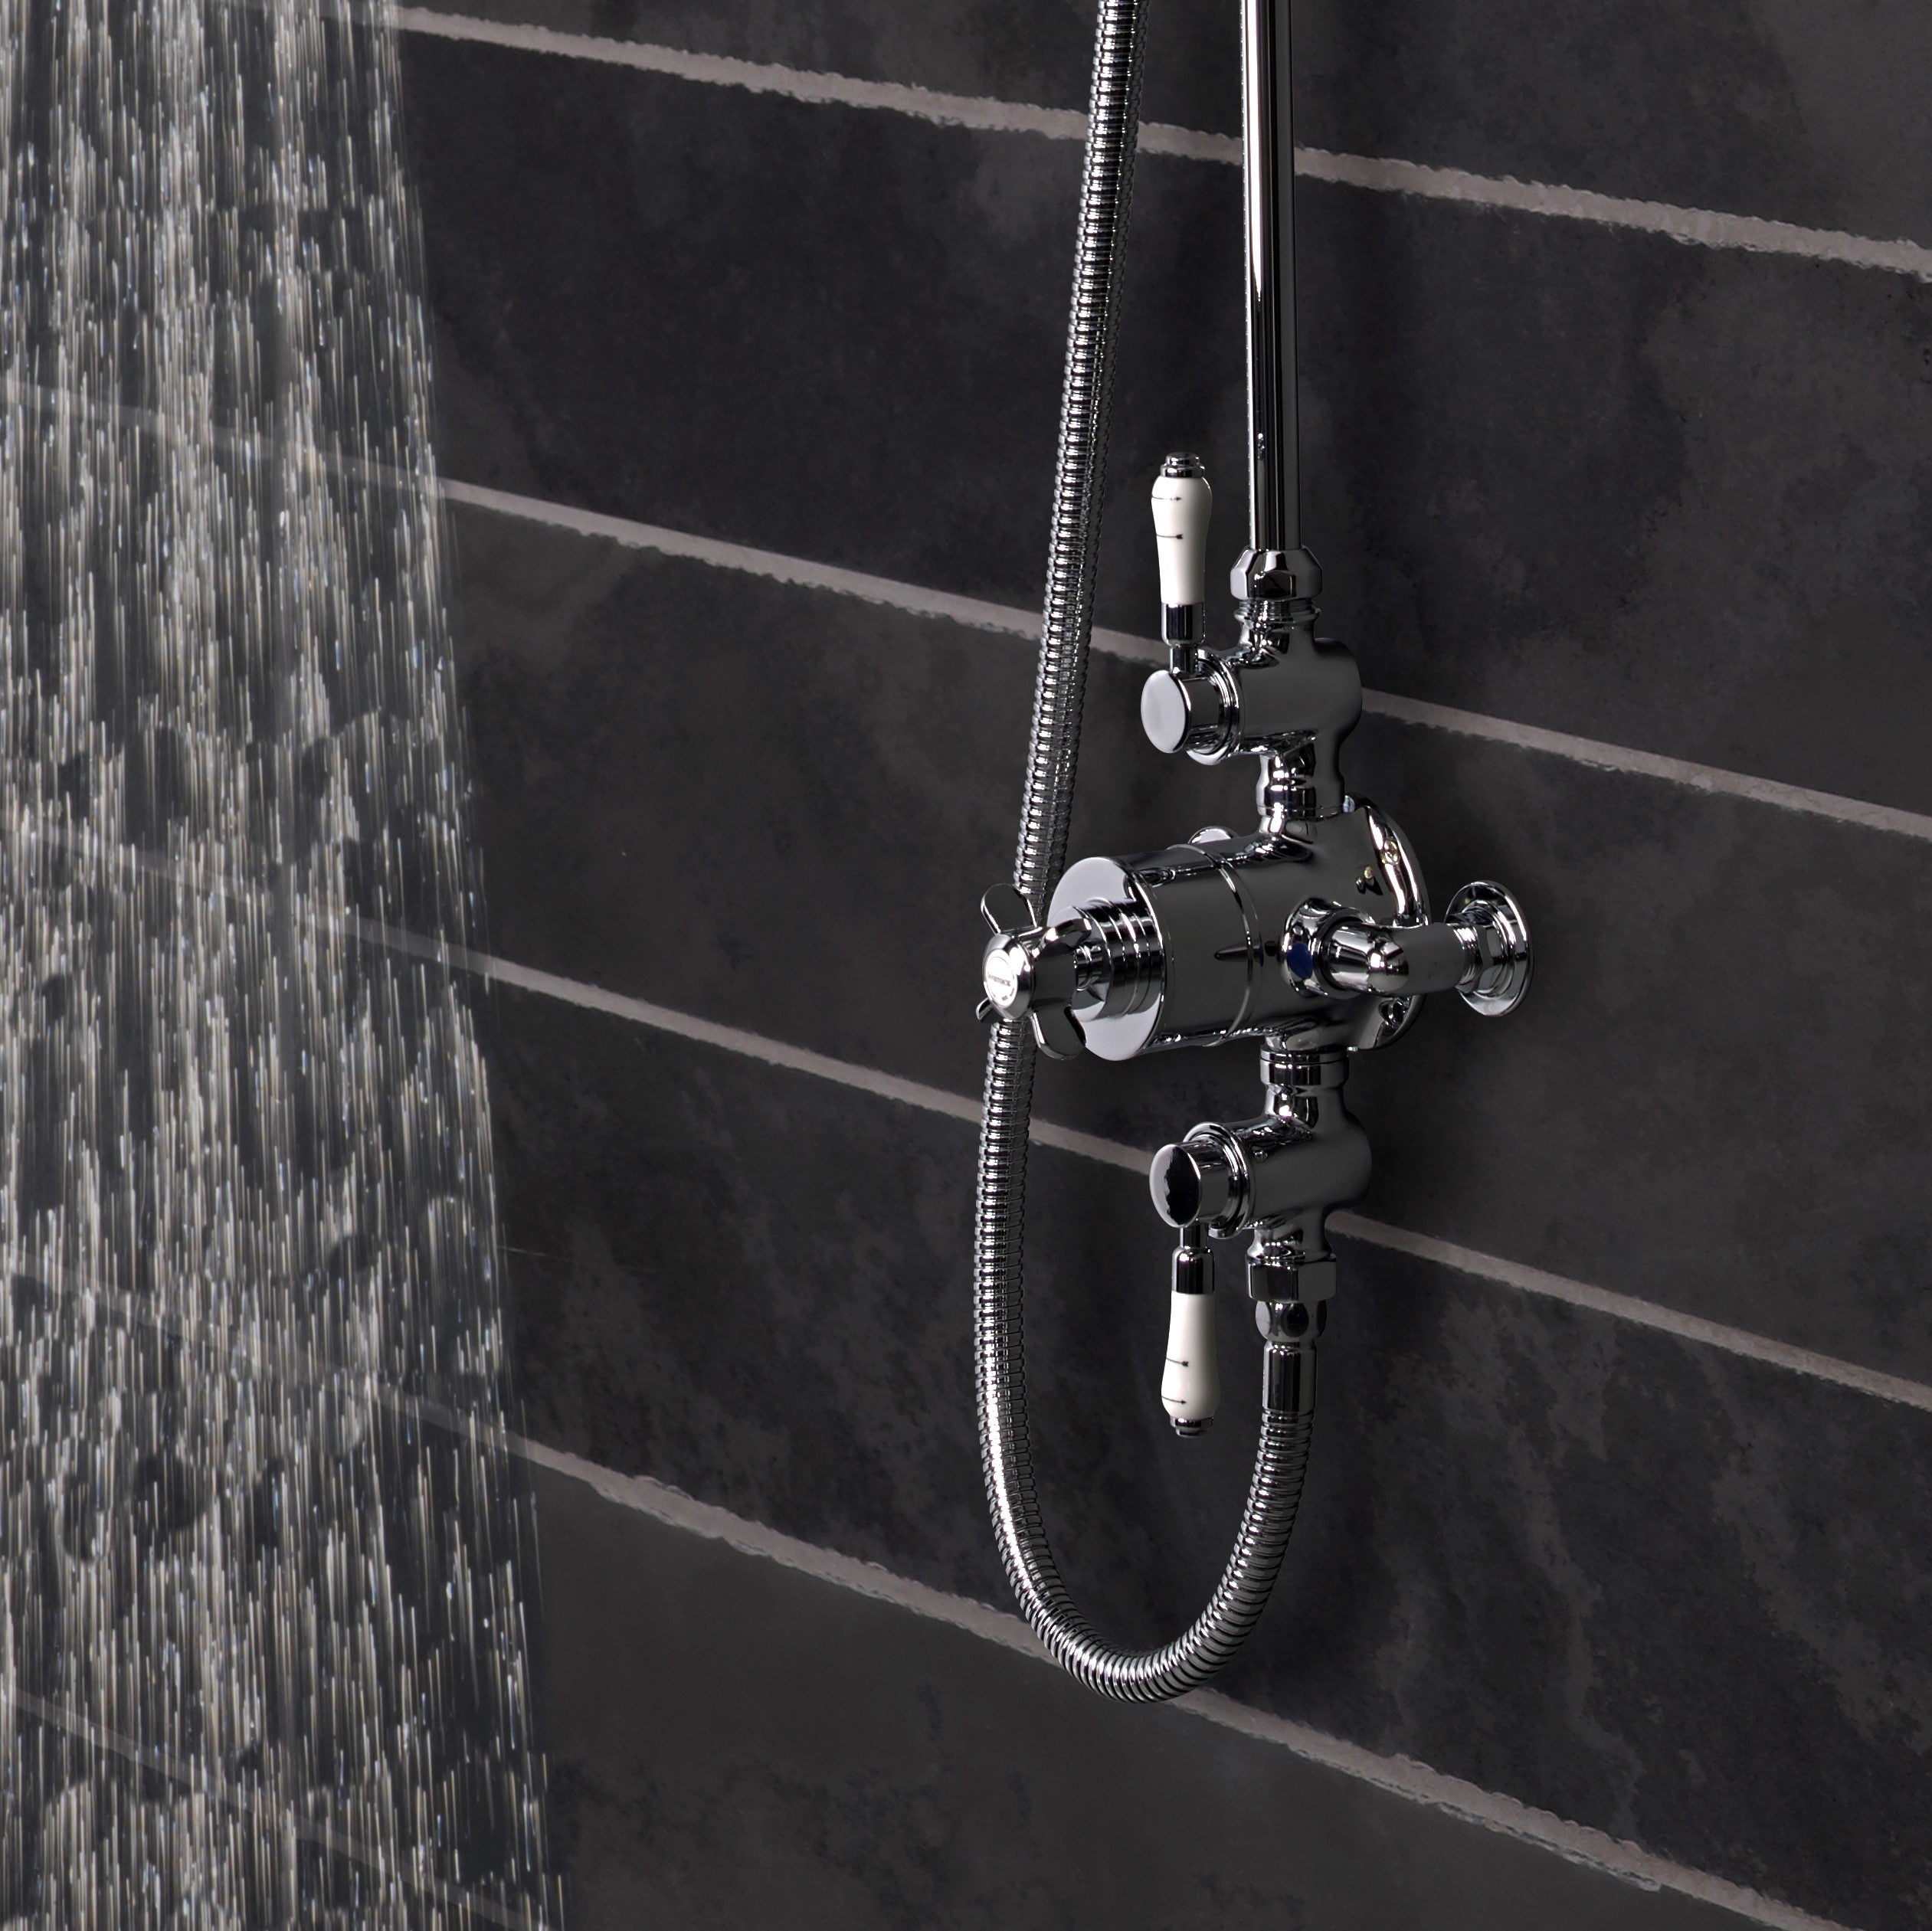 Tavistock Varsity Exposed Dual Function Shower System - Chrome close up view of the shower controls against grey tiling SVA1712